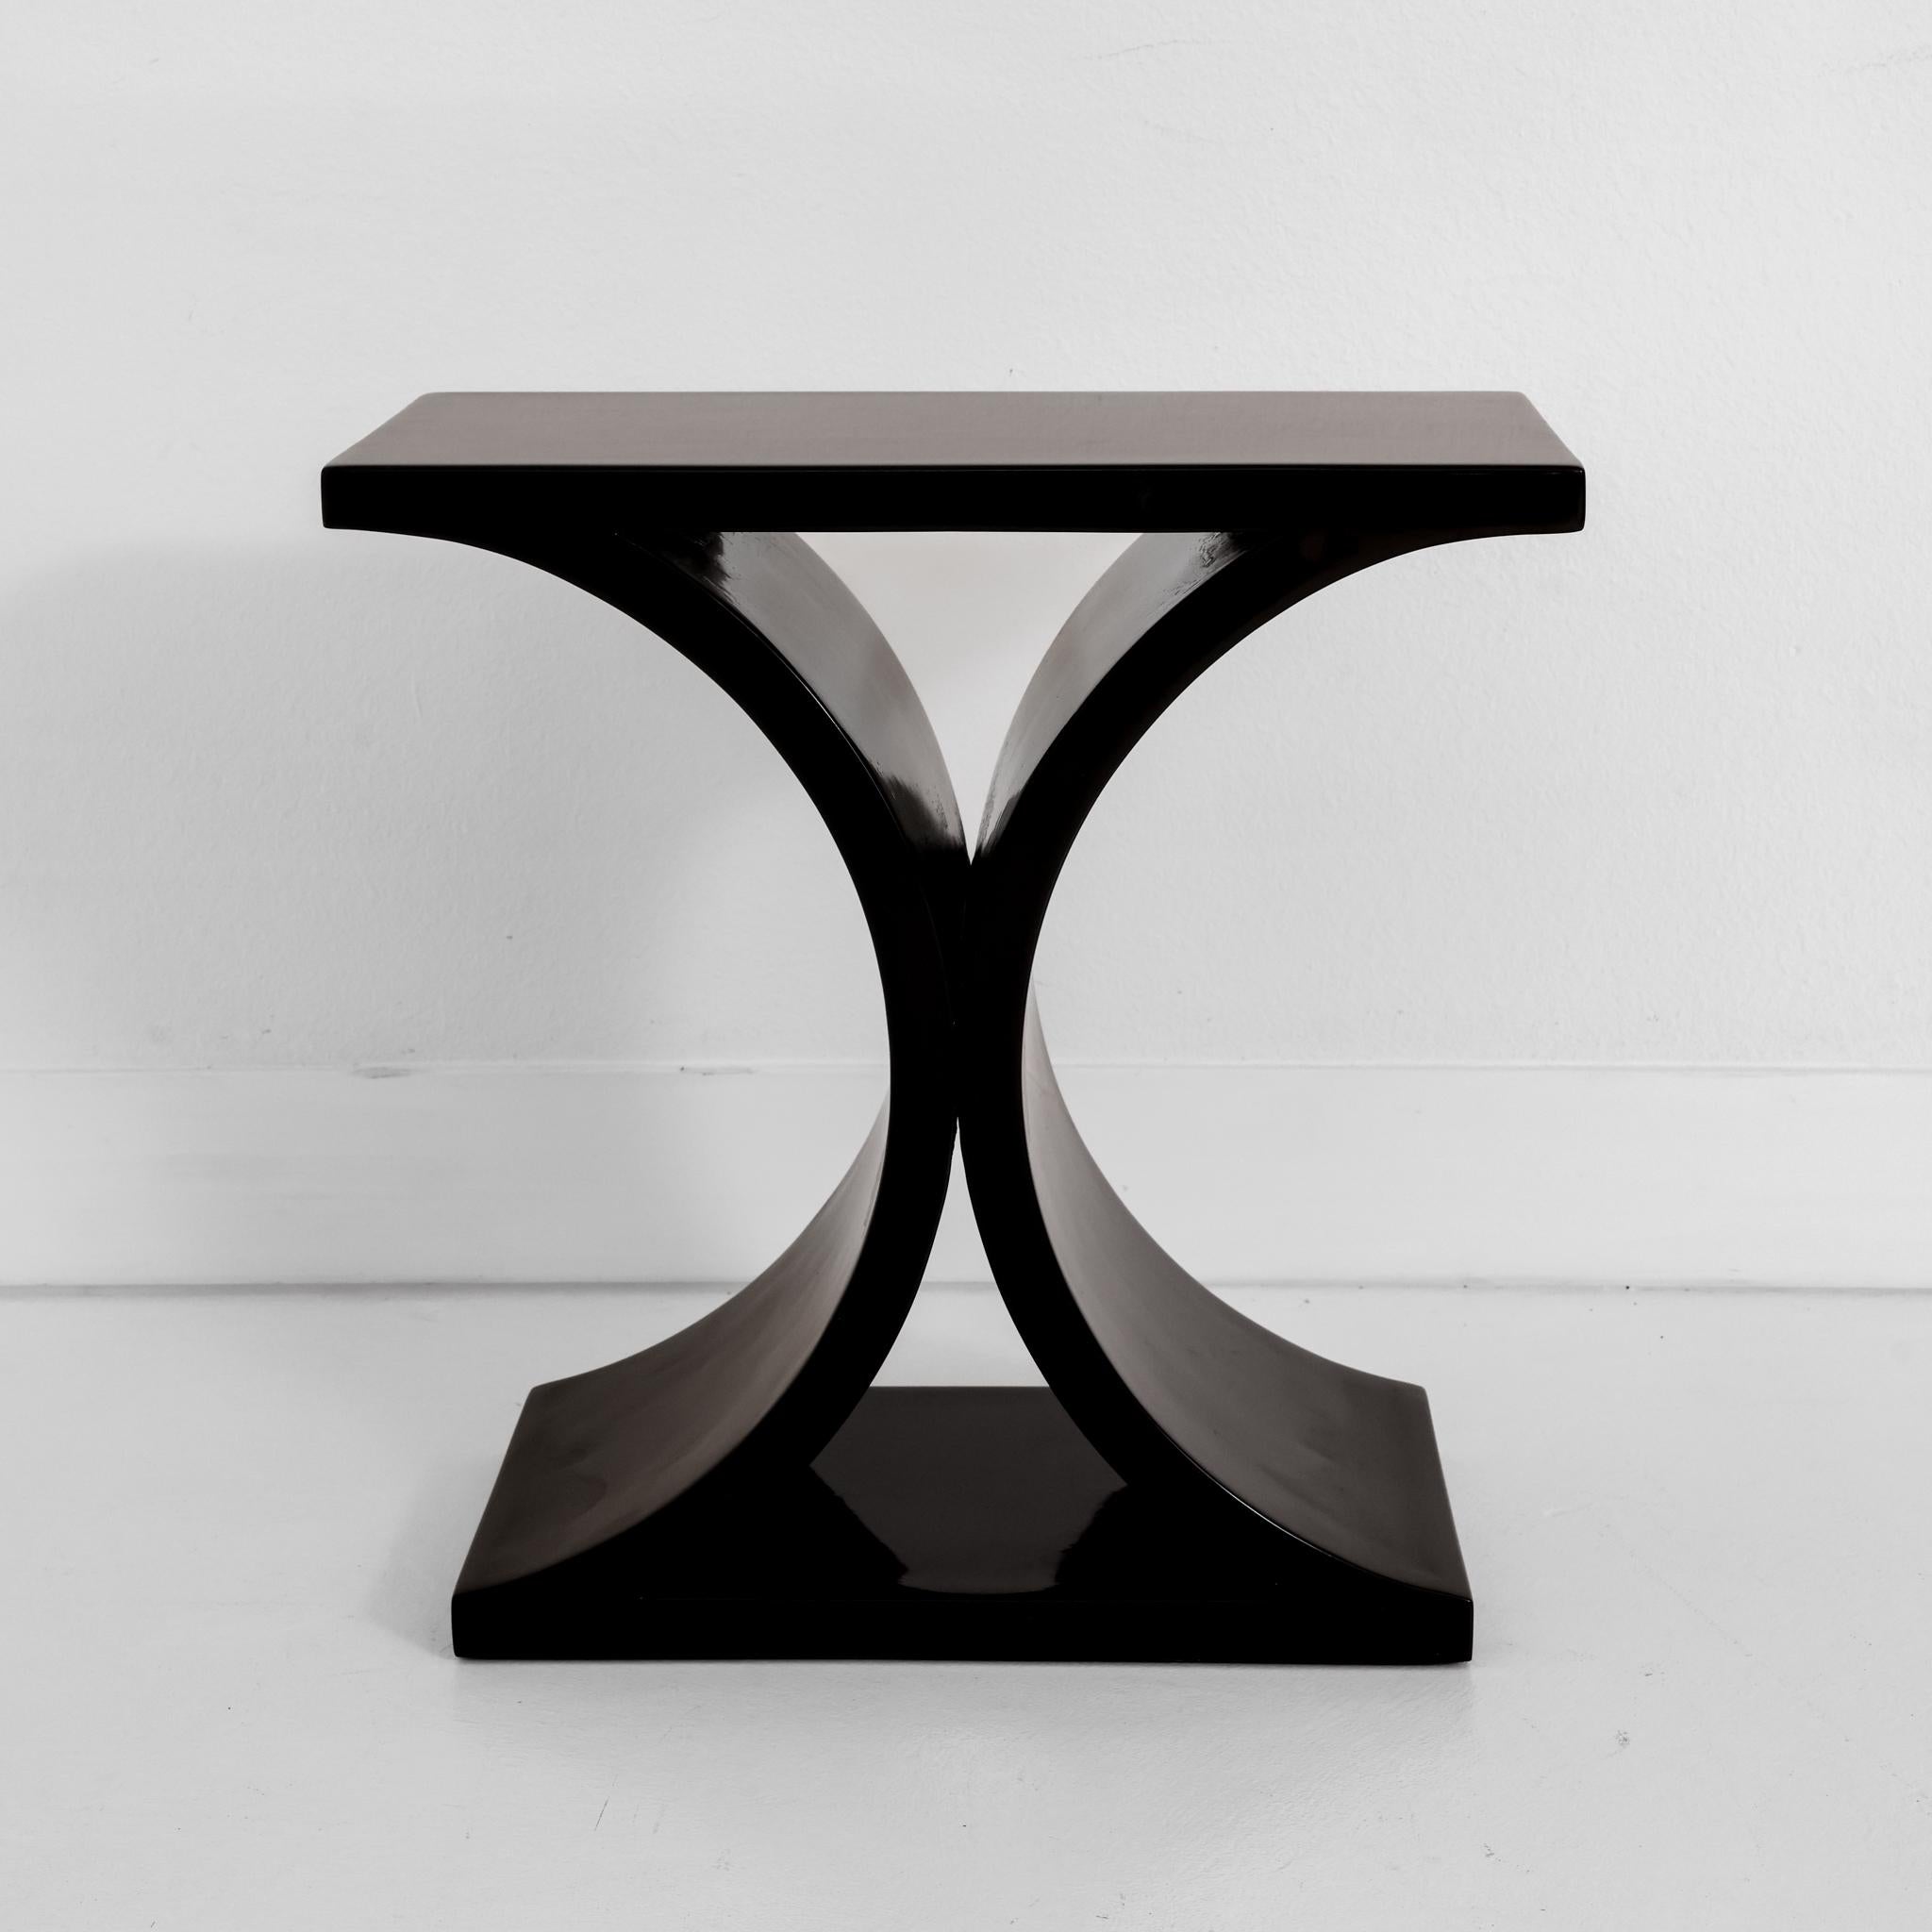 This is a rare black lacquered JMF side table by Karl Springer. The table has the classic JMF half circle/flared base. The JMF consoles in this style are more readily available, however the end tables are harder to find making this a unique